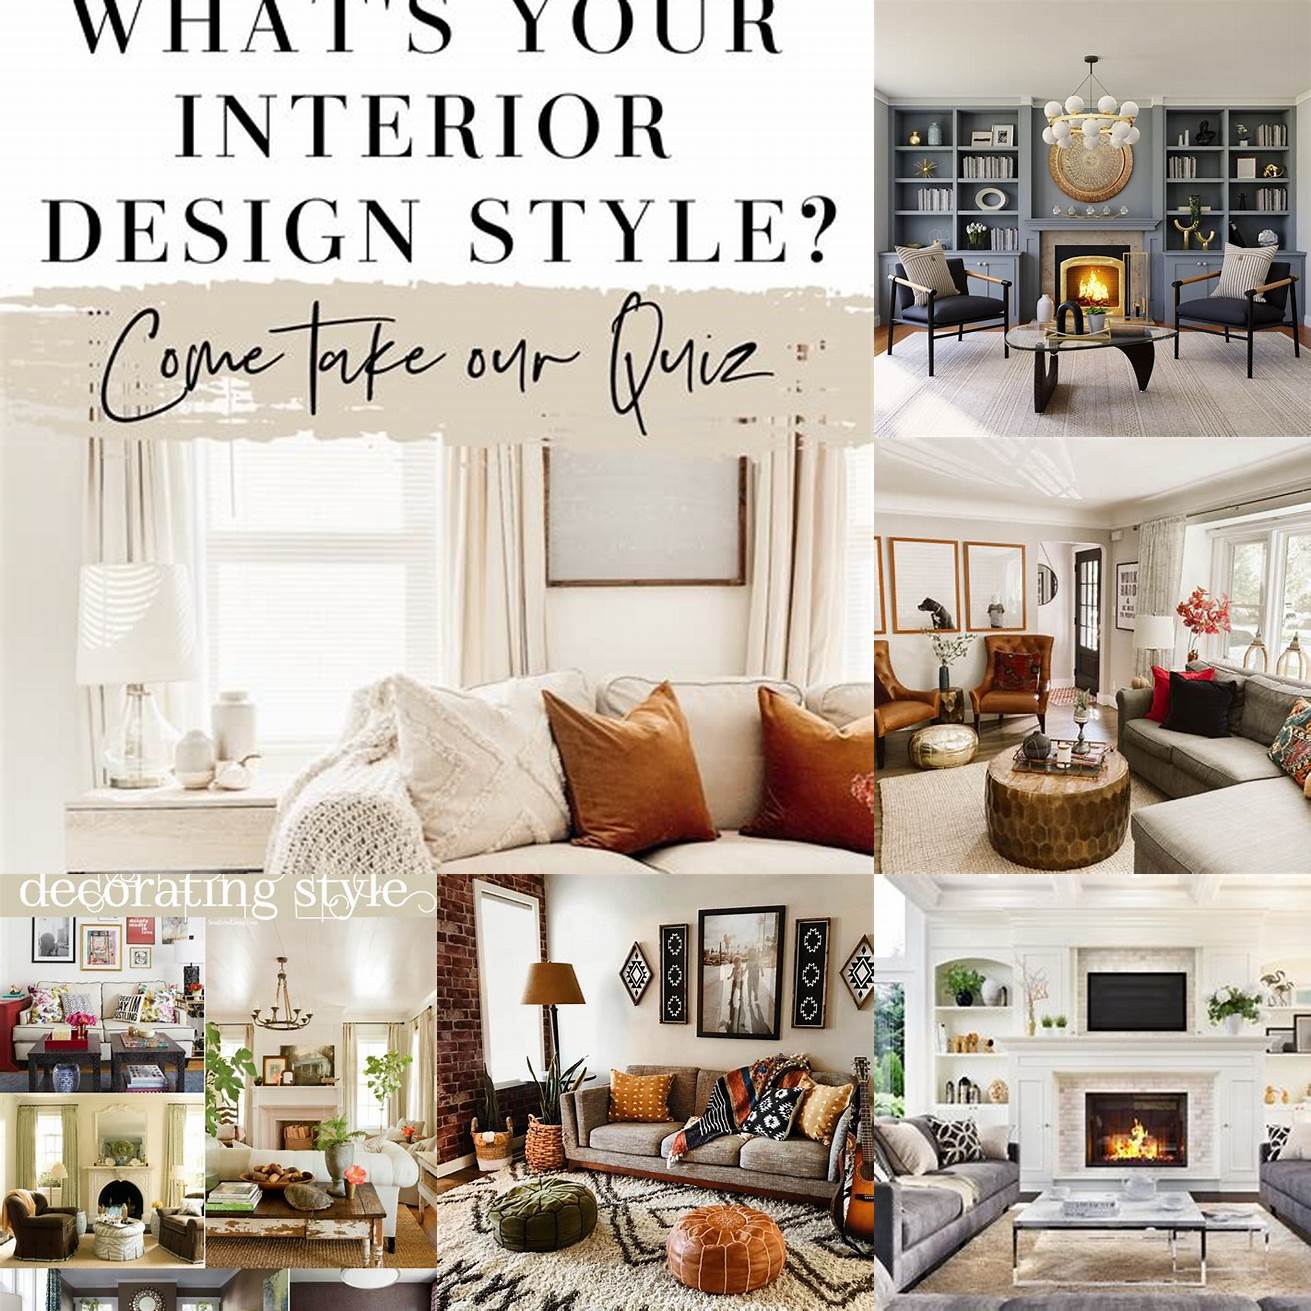 Style Choose a style that matches your home decor